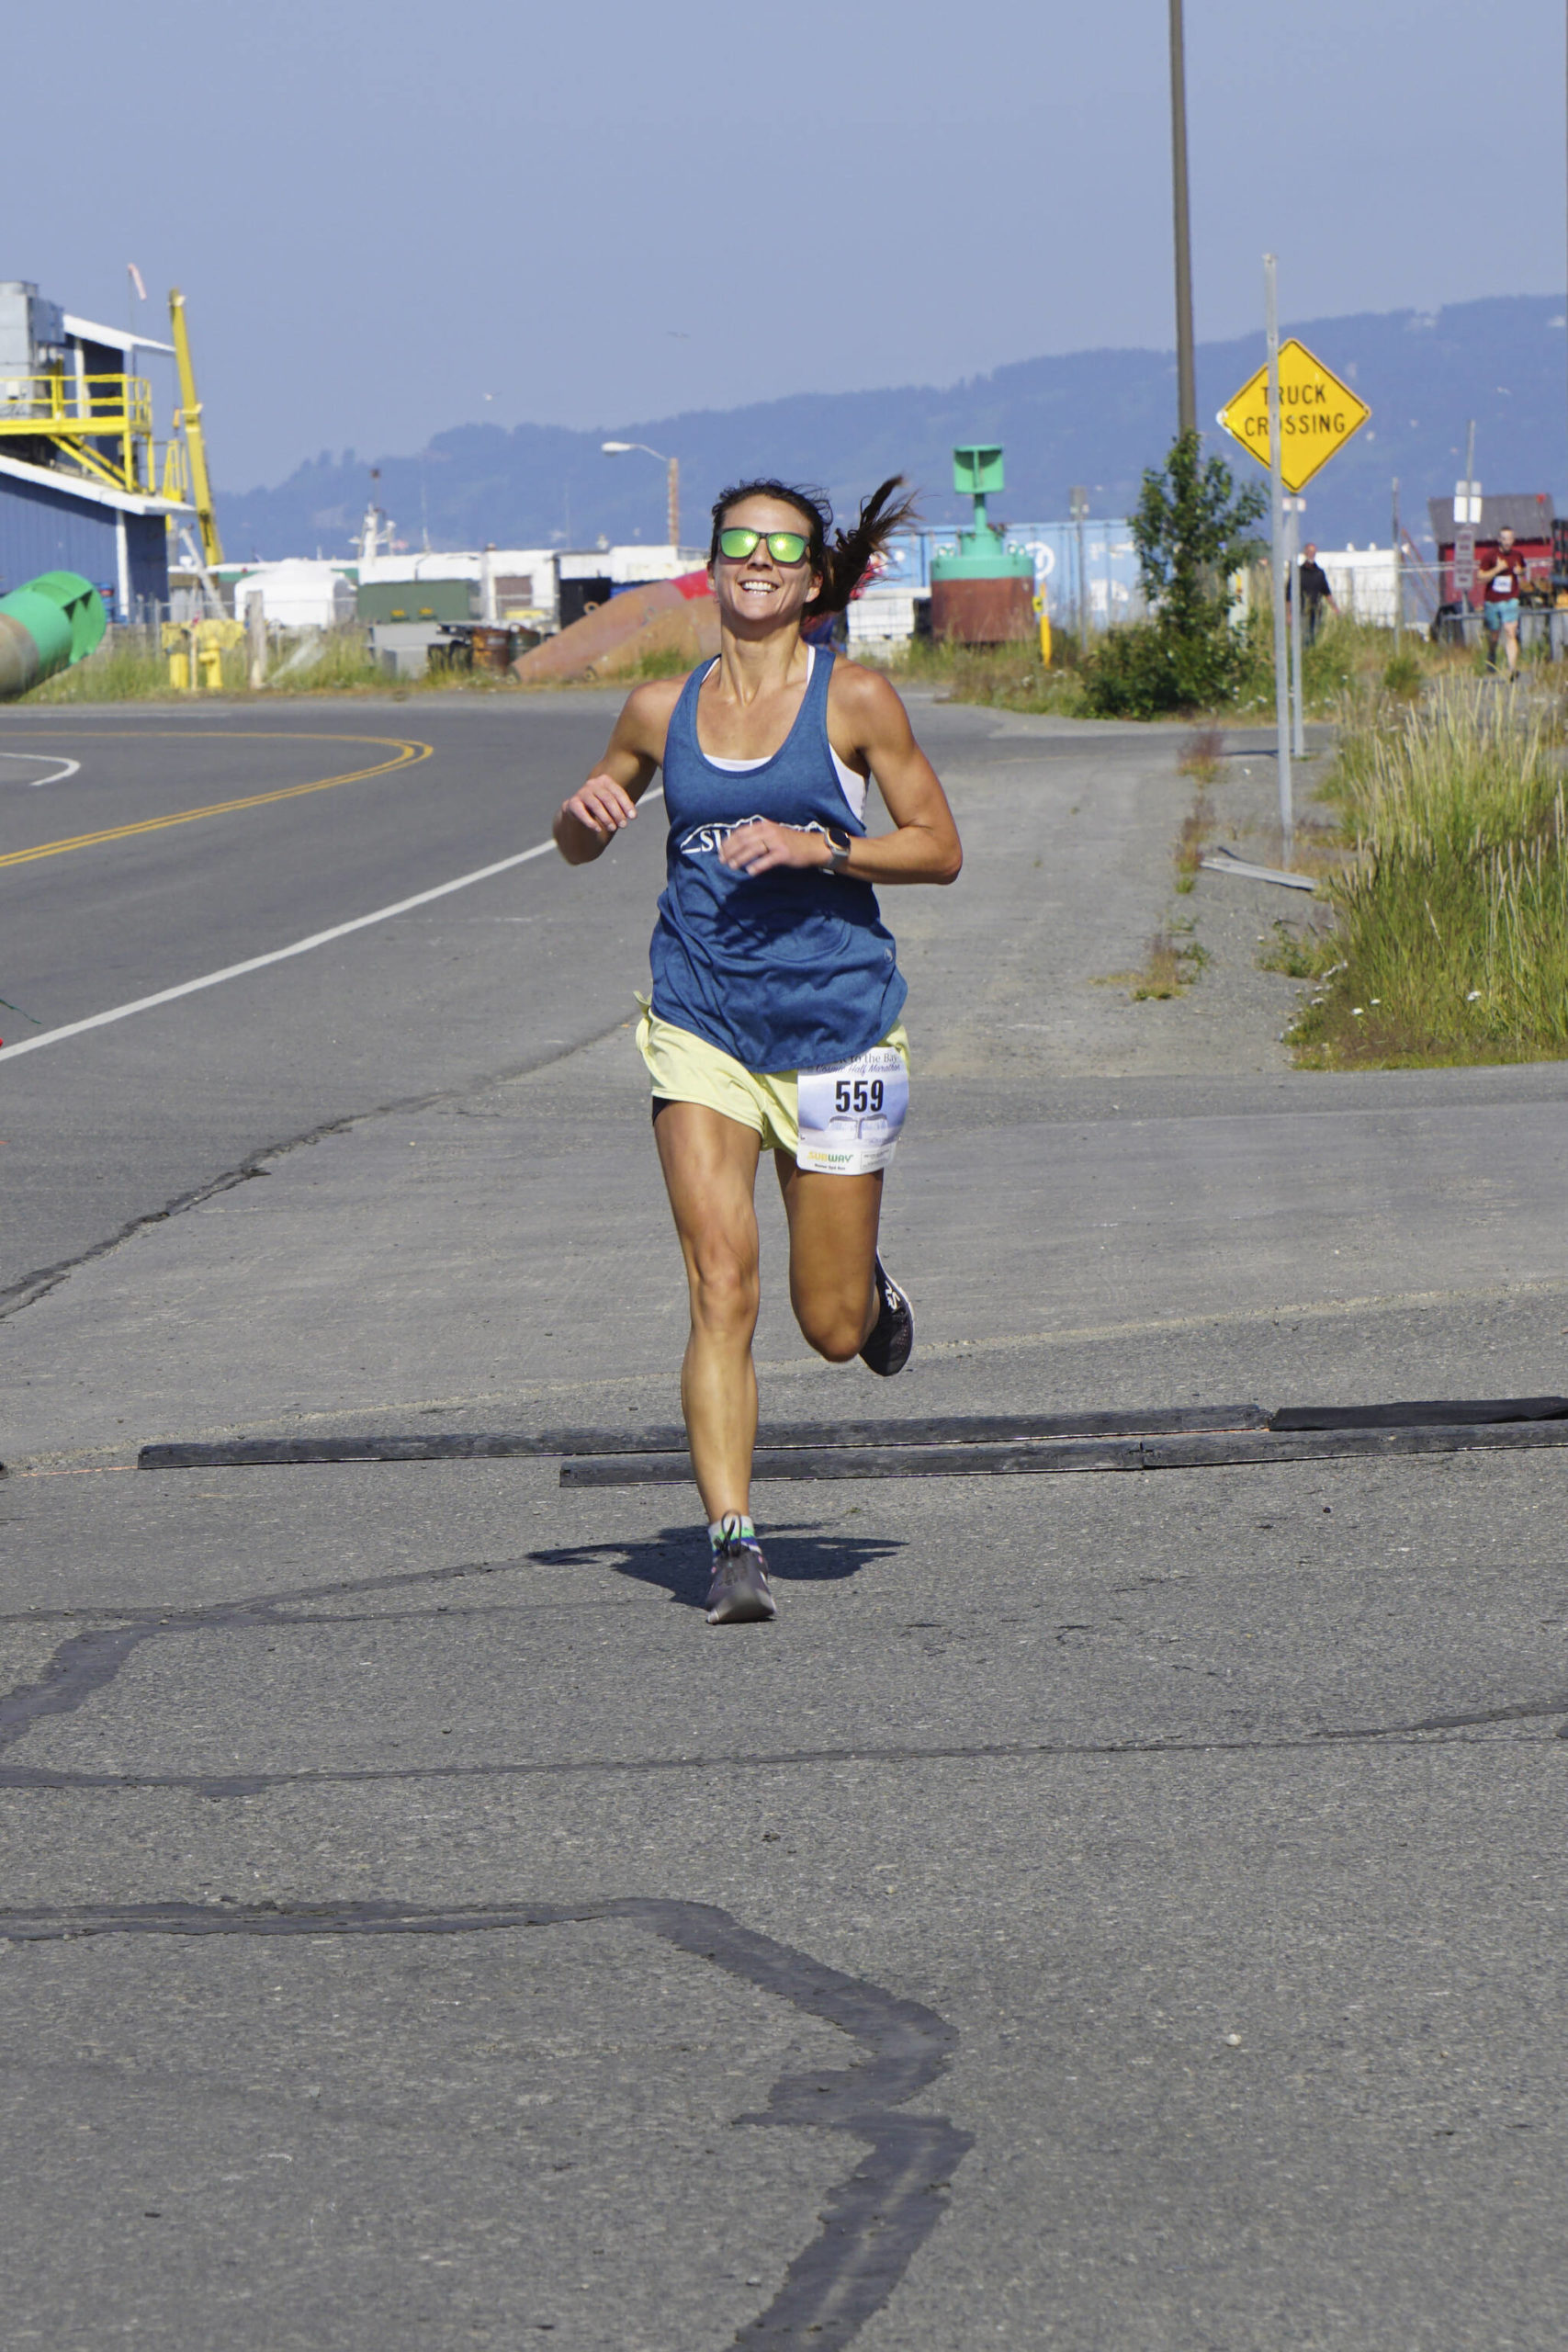 Amanda Cherok, the first-place woman runner in the 2022 Homer Spit Run, crosses the finish line on Saturday, June 25, 2022, at the End of the Road Park in Homer, Alaska. (Photo by Michael Armstrong/Homer News)